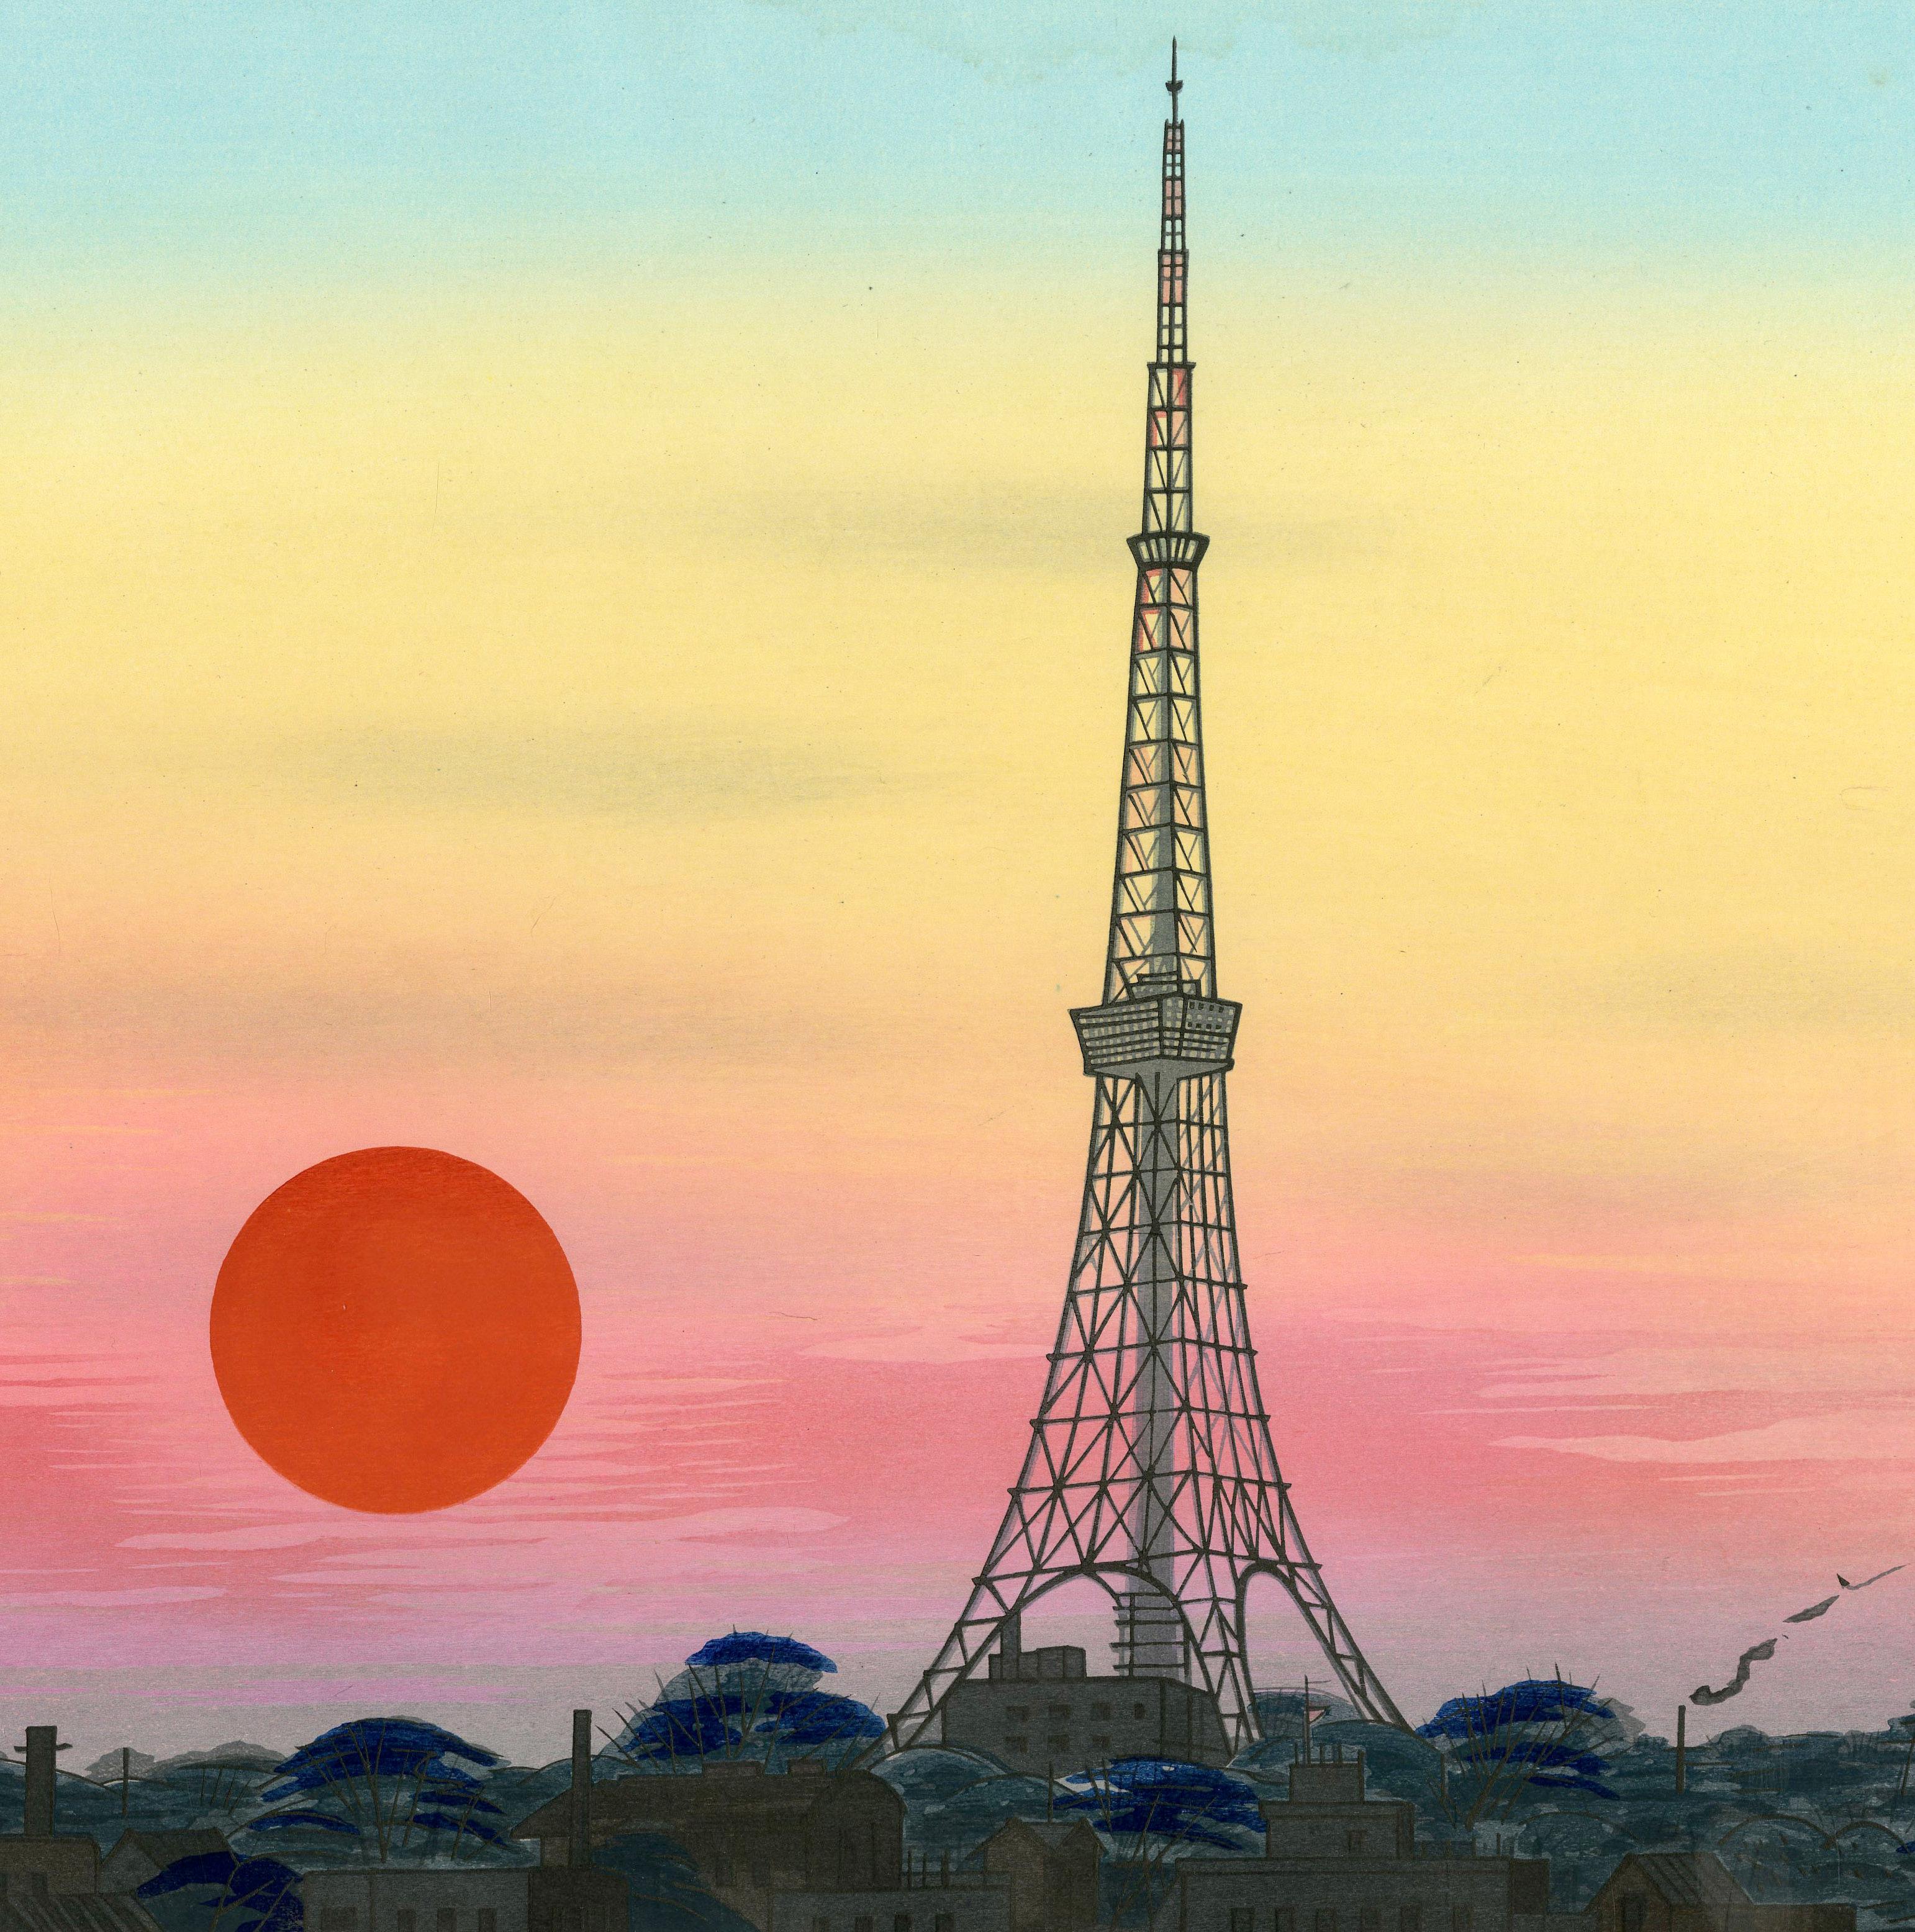 Tokyo Tower in Shiba
Color woodblock, 1960
Signed and sealed lower right
Signed with the artist's name: